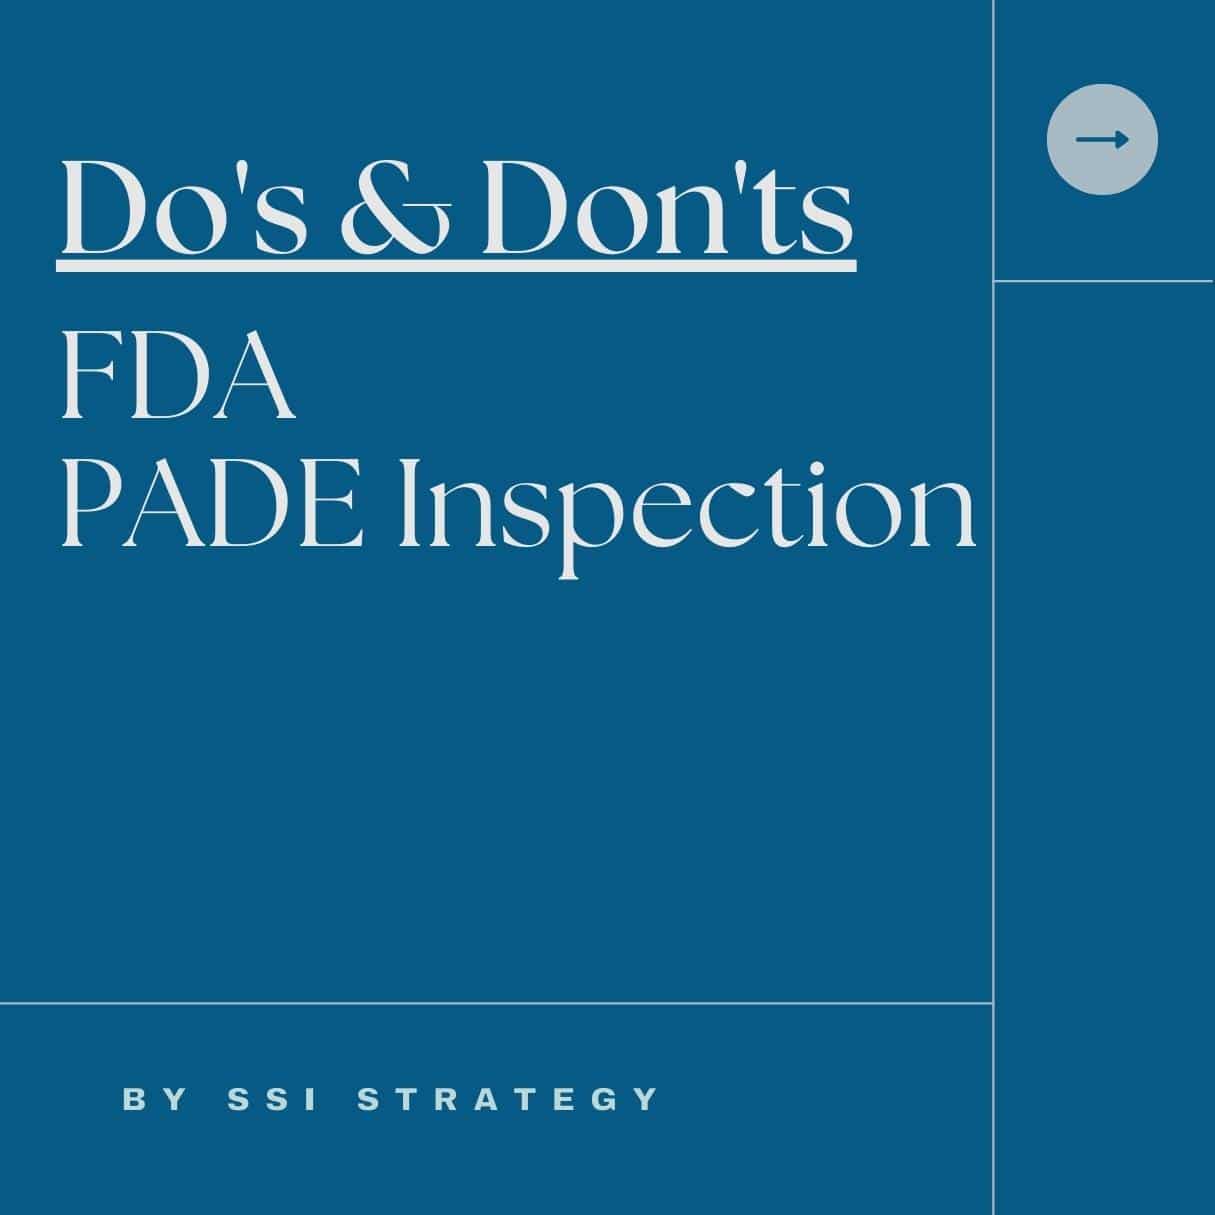 Dos & Donts PADE Inspection